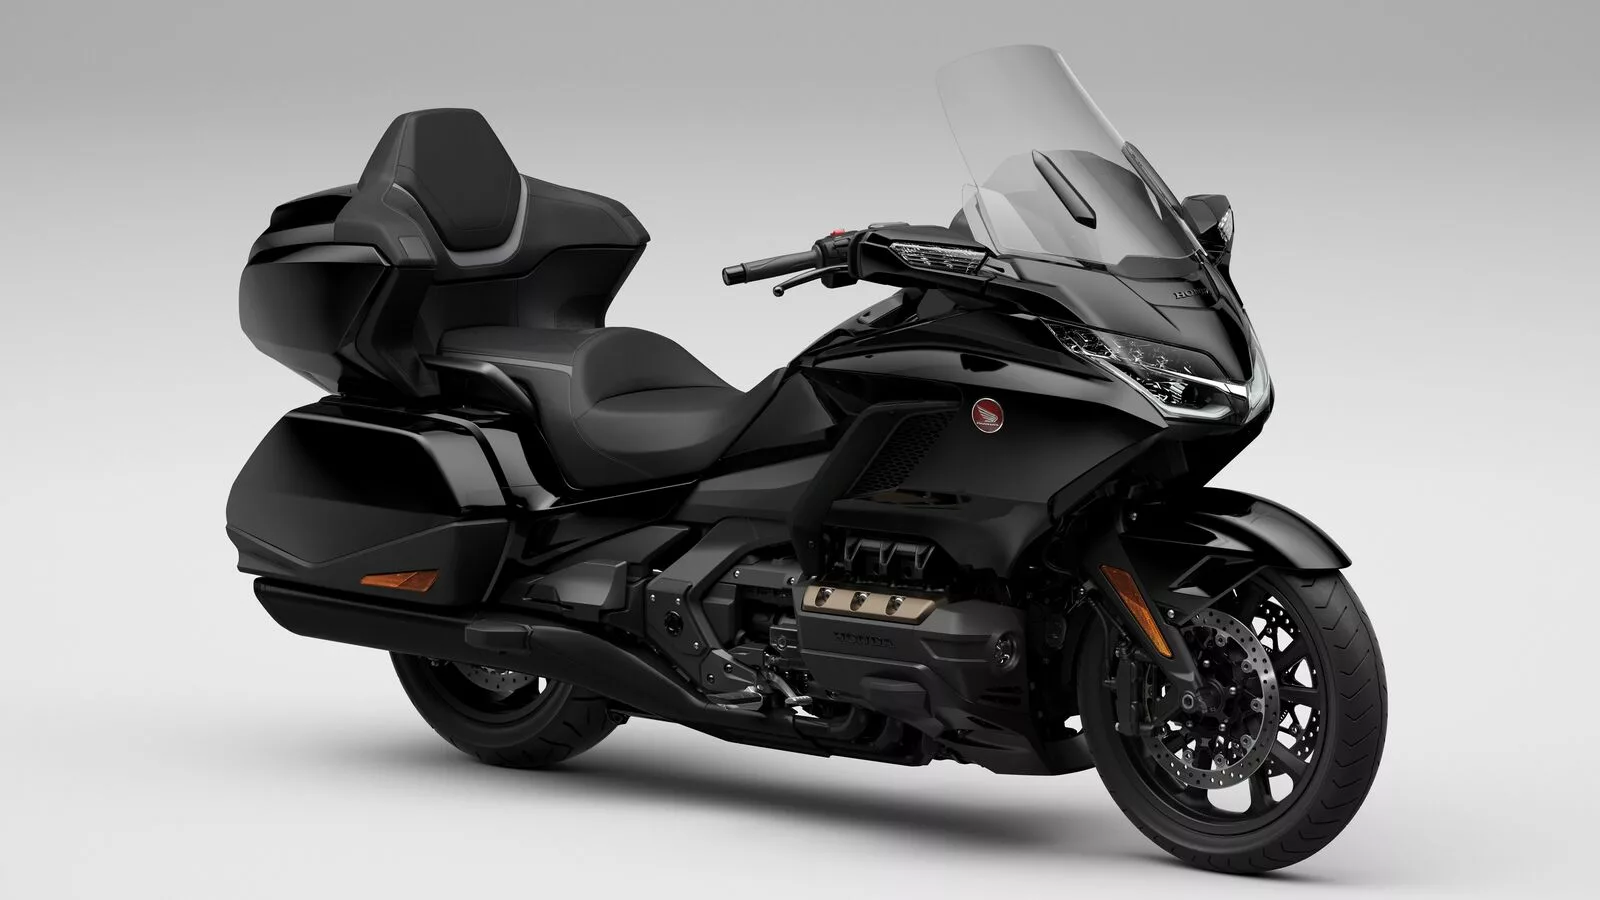 Honda Gold Wing and CBR1000RR recalled due to faulty fuel pumps